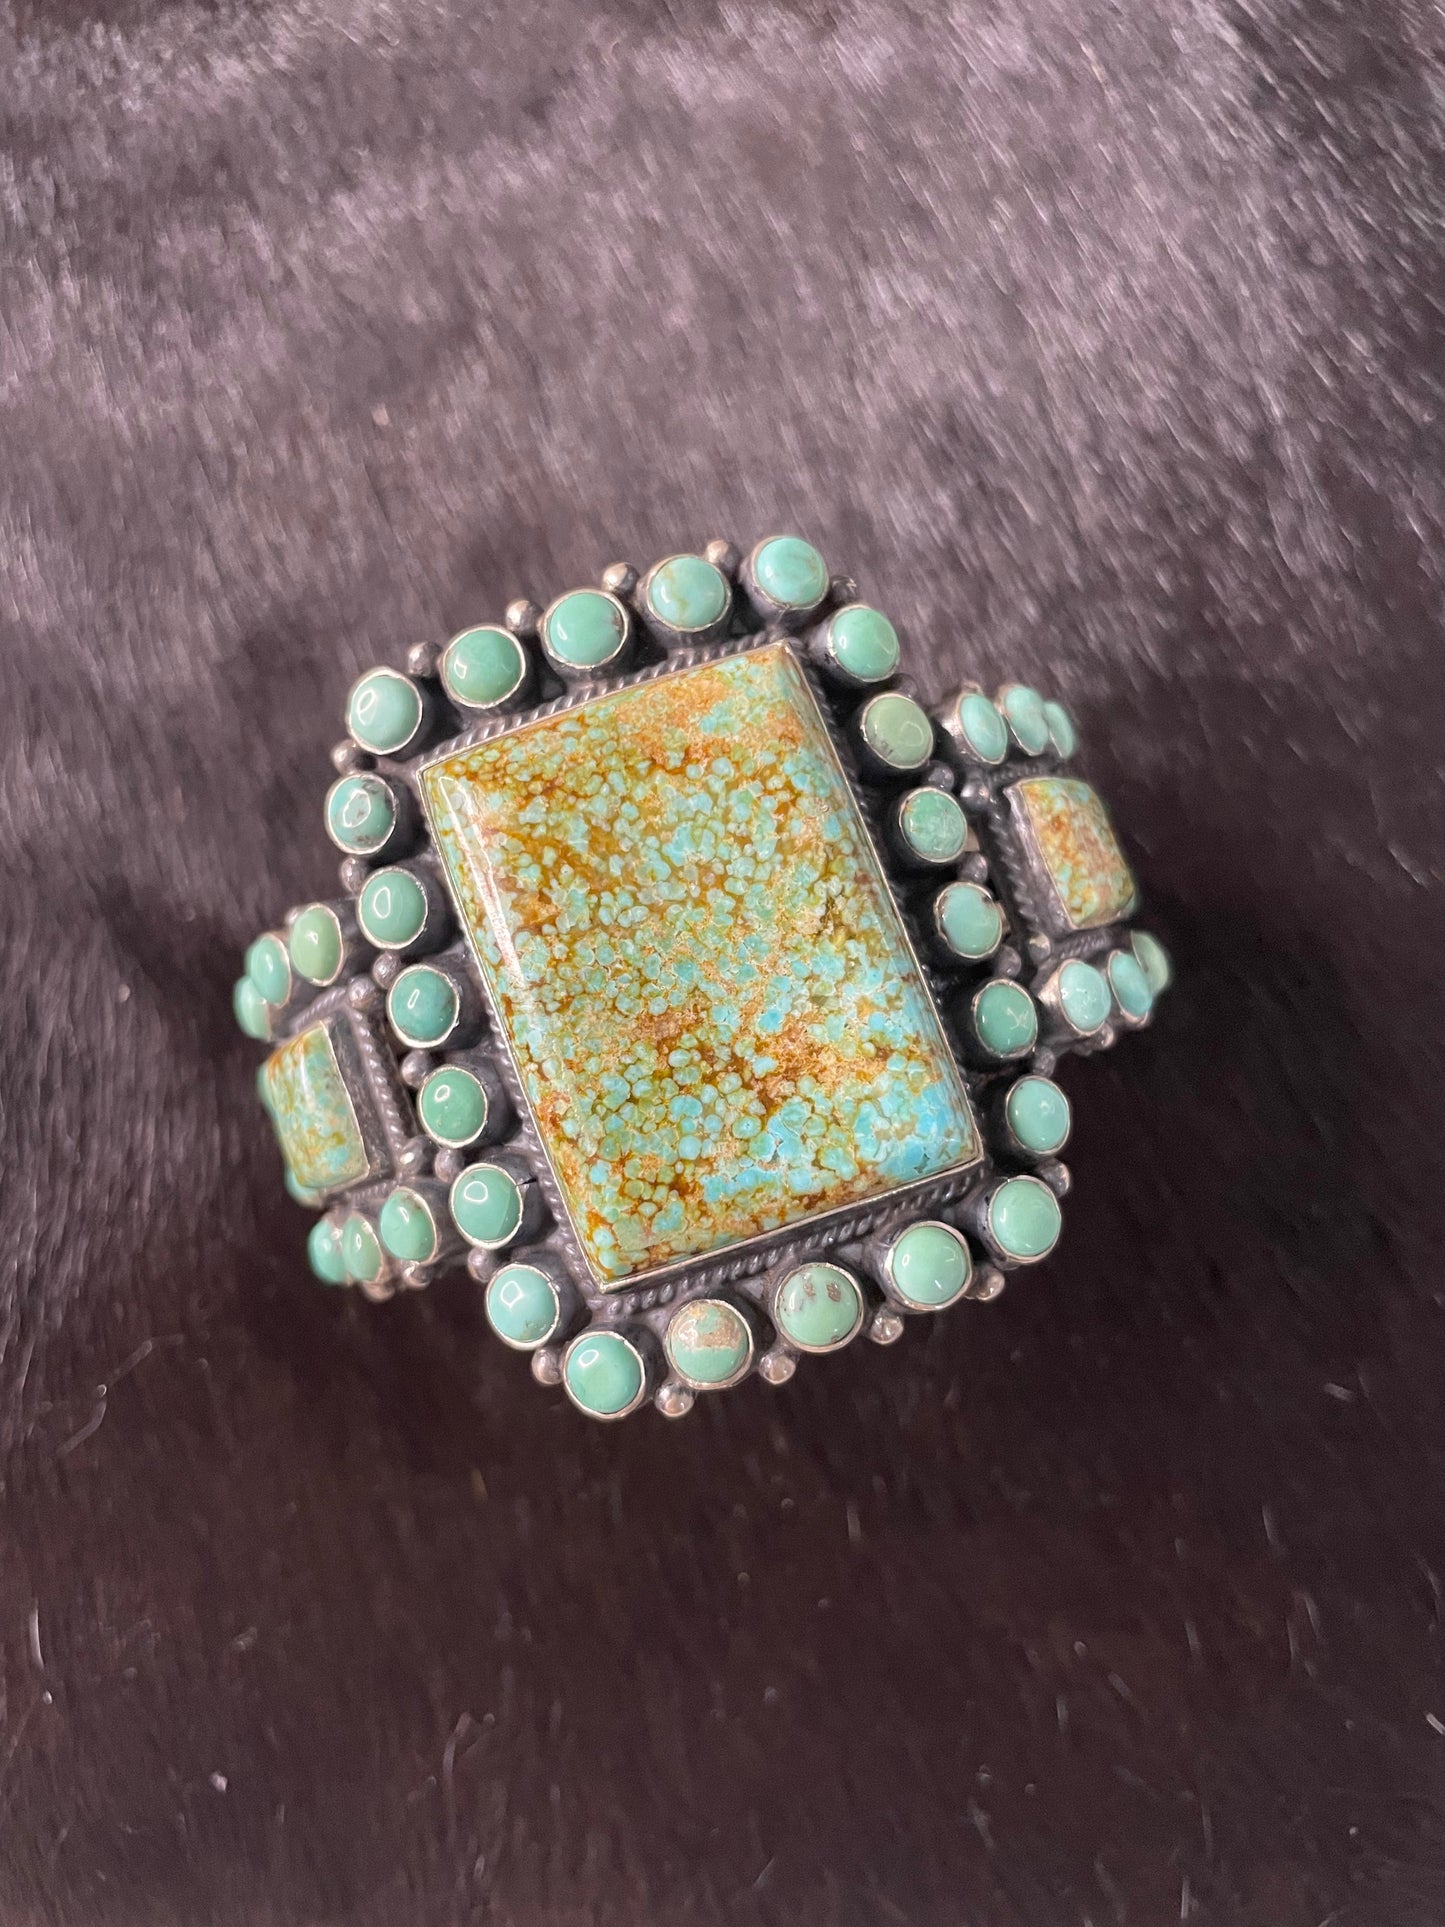 Anthony Skeets Navajo Turquoise & Sterling Silver Cuff Bracelet Signed